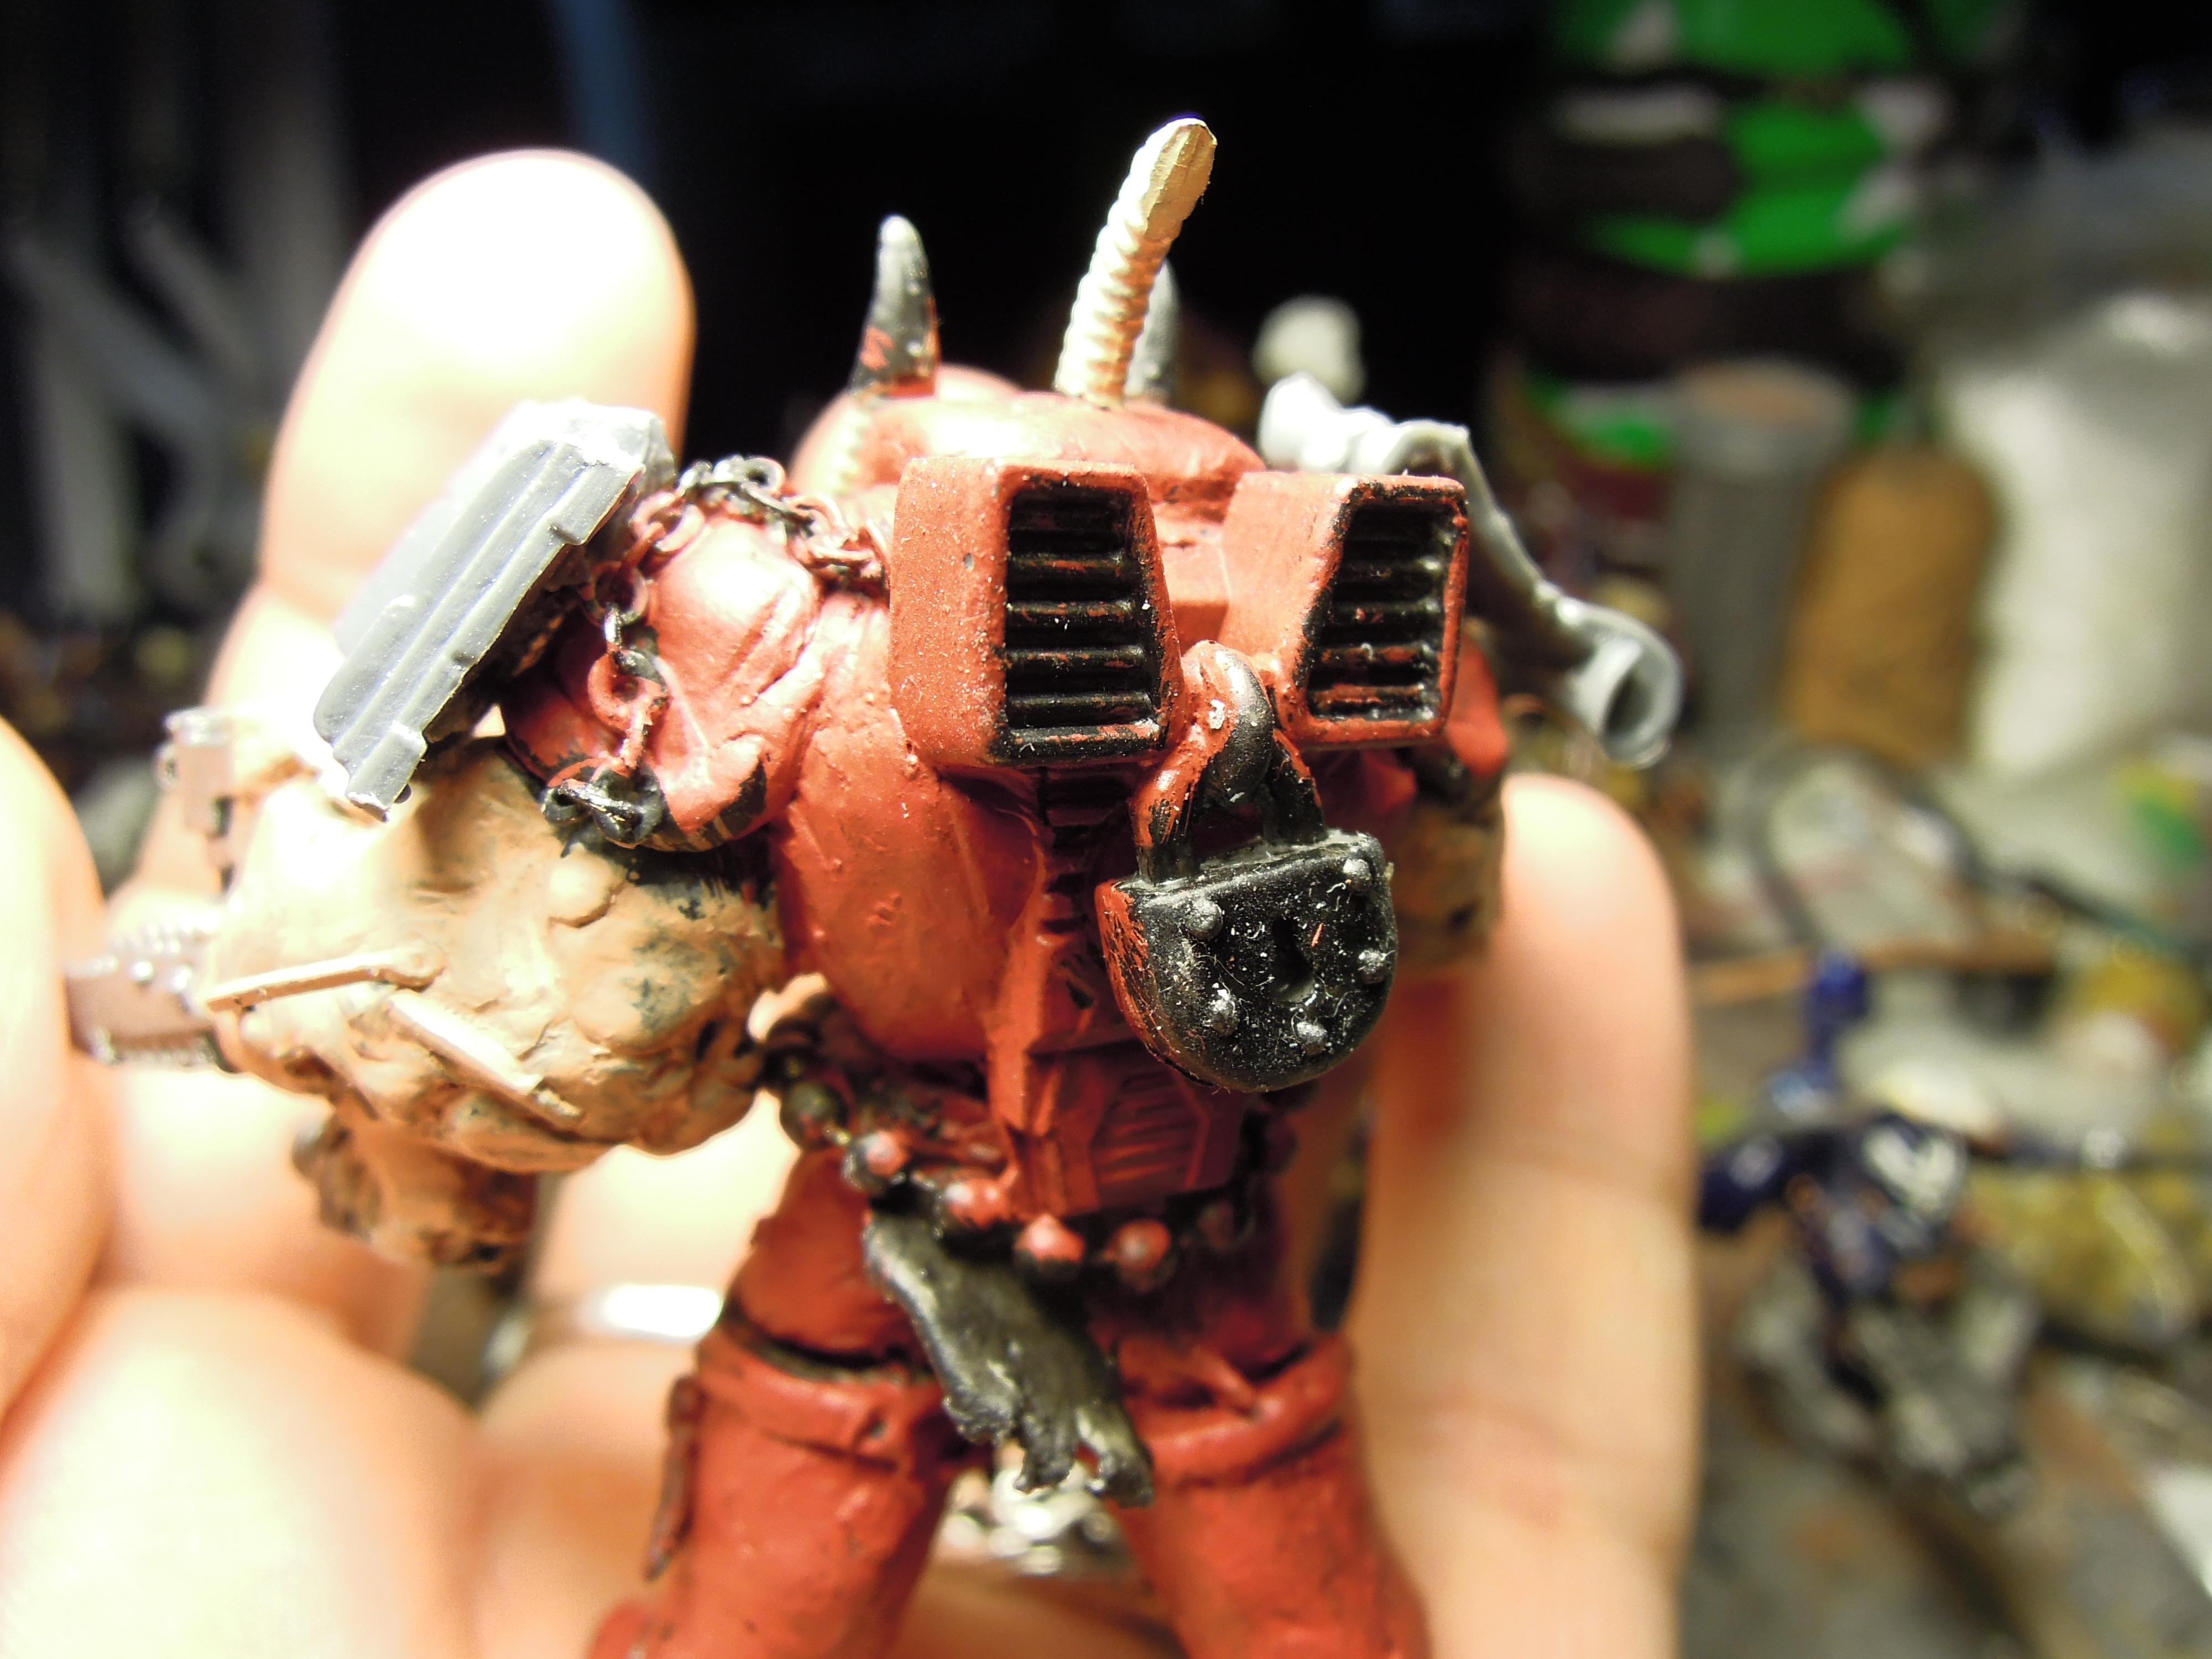 Book Of Lorgar, Chaos, Chaos Space Marines, Chaos Undivided, Conversion, Heavy Support, Heresy, Heretic Astartes, Infantry, Obliterators, Scratch Build, Technolog, Traitor Legions, Warhammer 40,000, Word Bearers, Work In Progress